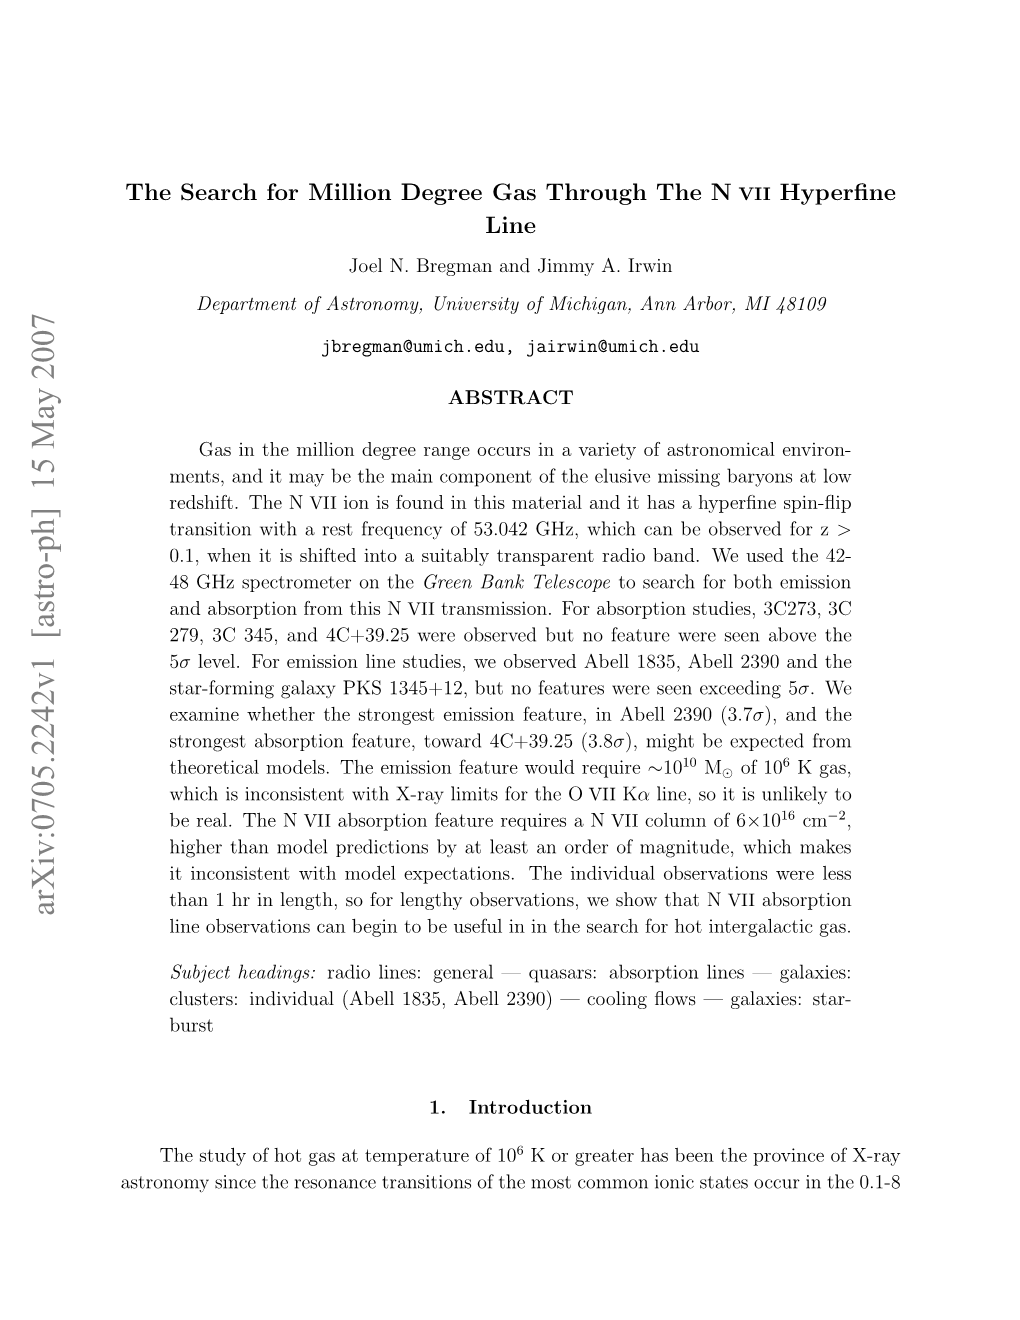 The Search for Million Degree Gas Through the NVII Hyperfine Line